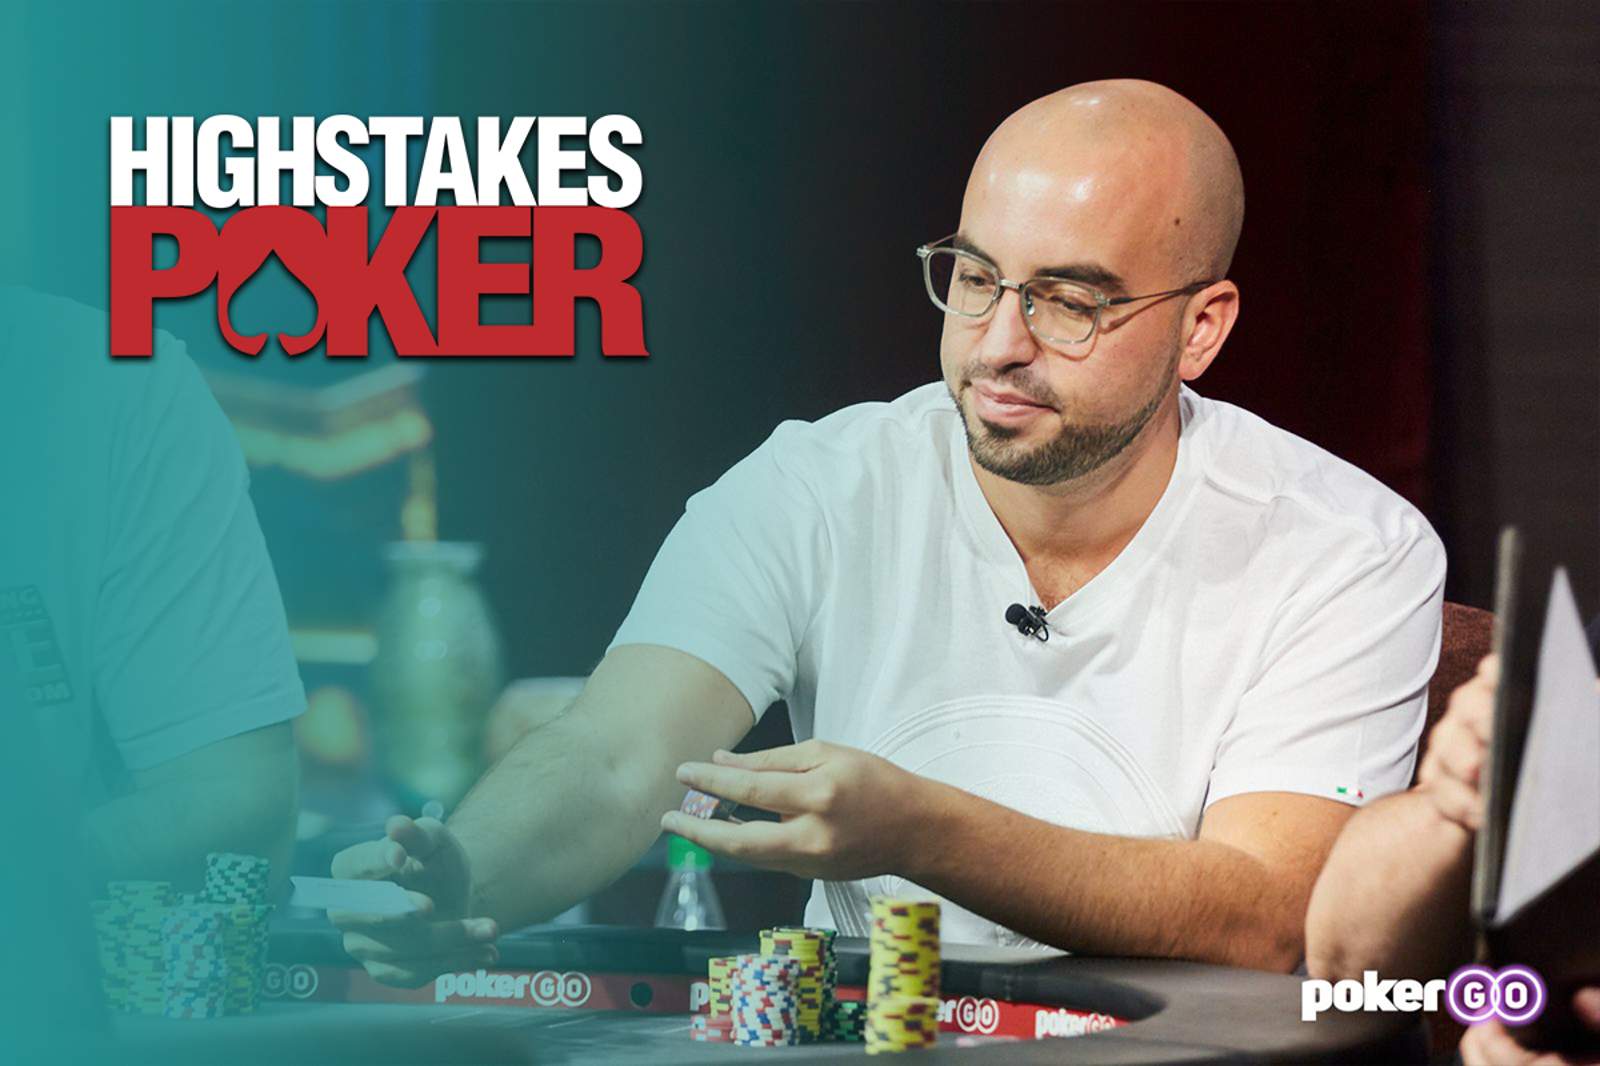 The Return of High Stakes Poker with Bryn Kenney